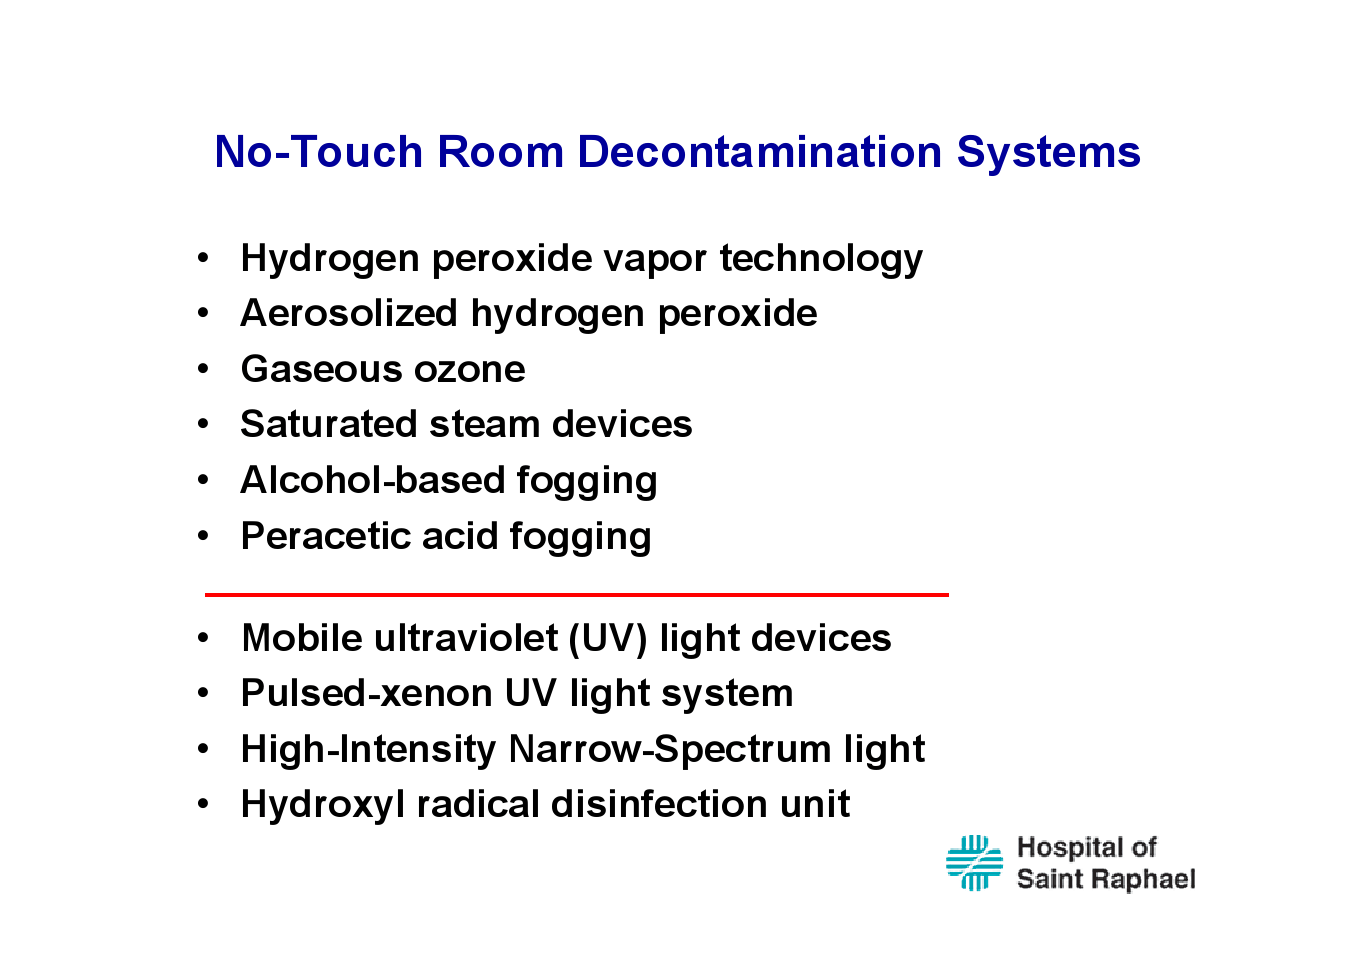 New-approaches-to-decontamination-of-rooms多种方法比较 2012